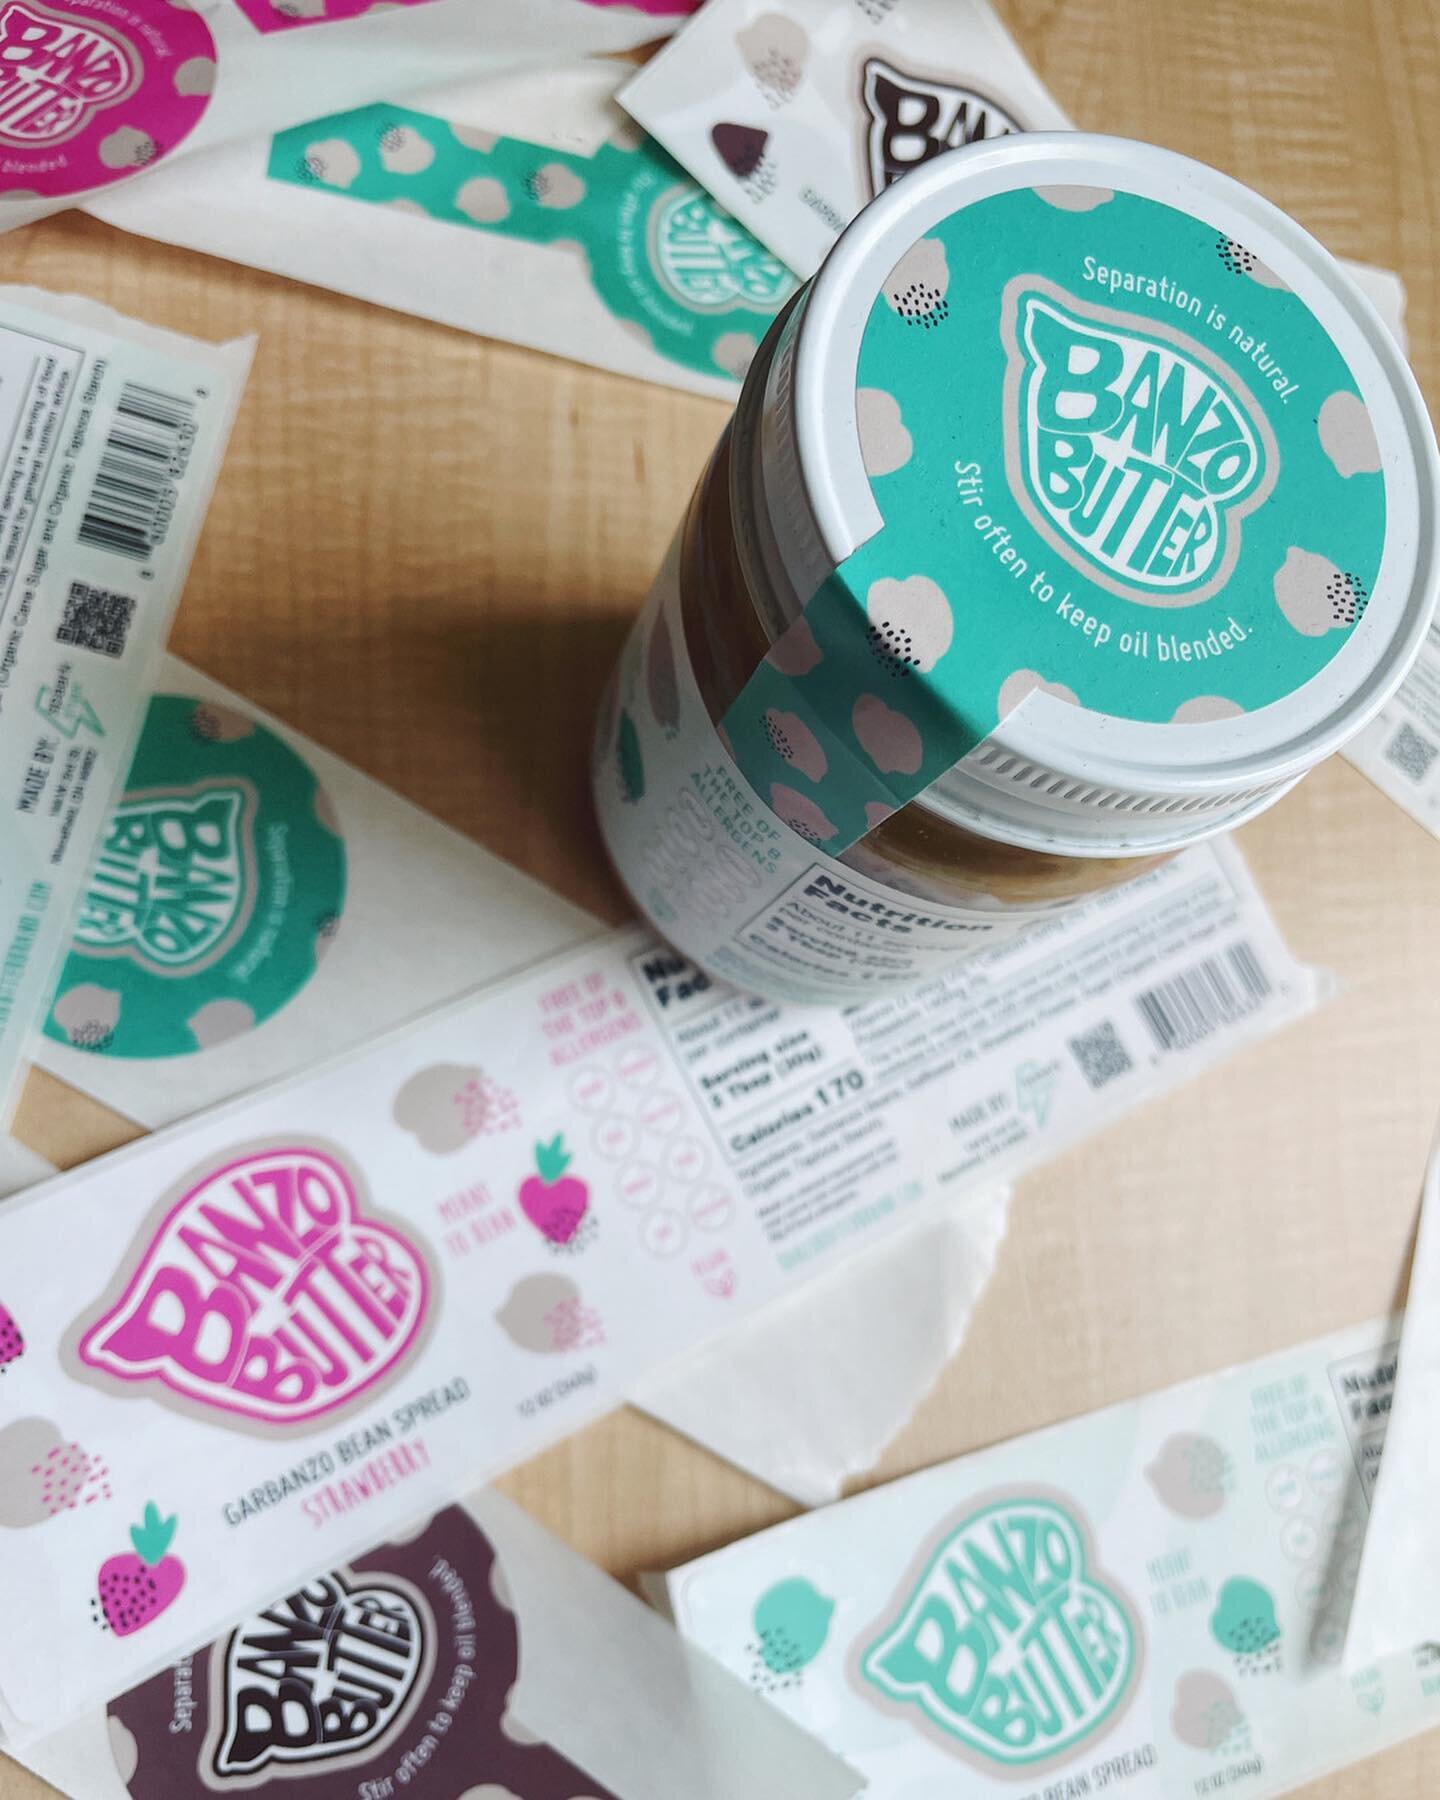 Earlier this year, we refreshed the Banzo Butter logos and created an umbrella brand for Amy's company @banzobrands. Now, we get to redesign the packaging labels for her incredible products! 
⠀⠀⠀⠀⠀⠀⠀⠀⠀
Looking over some old packaging labels, + gettin